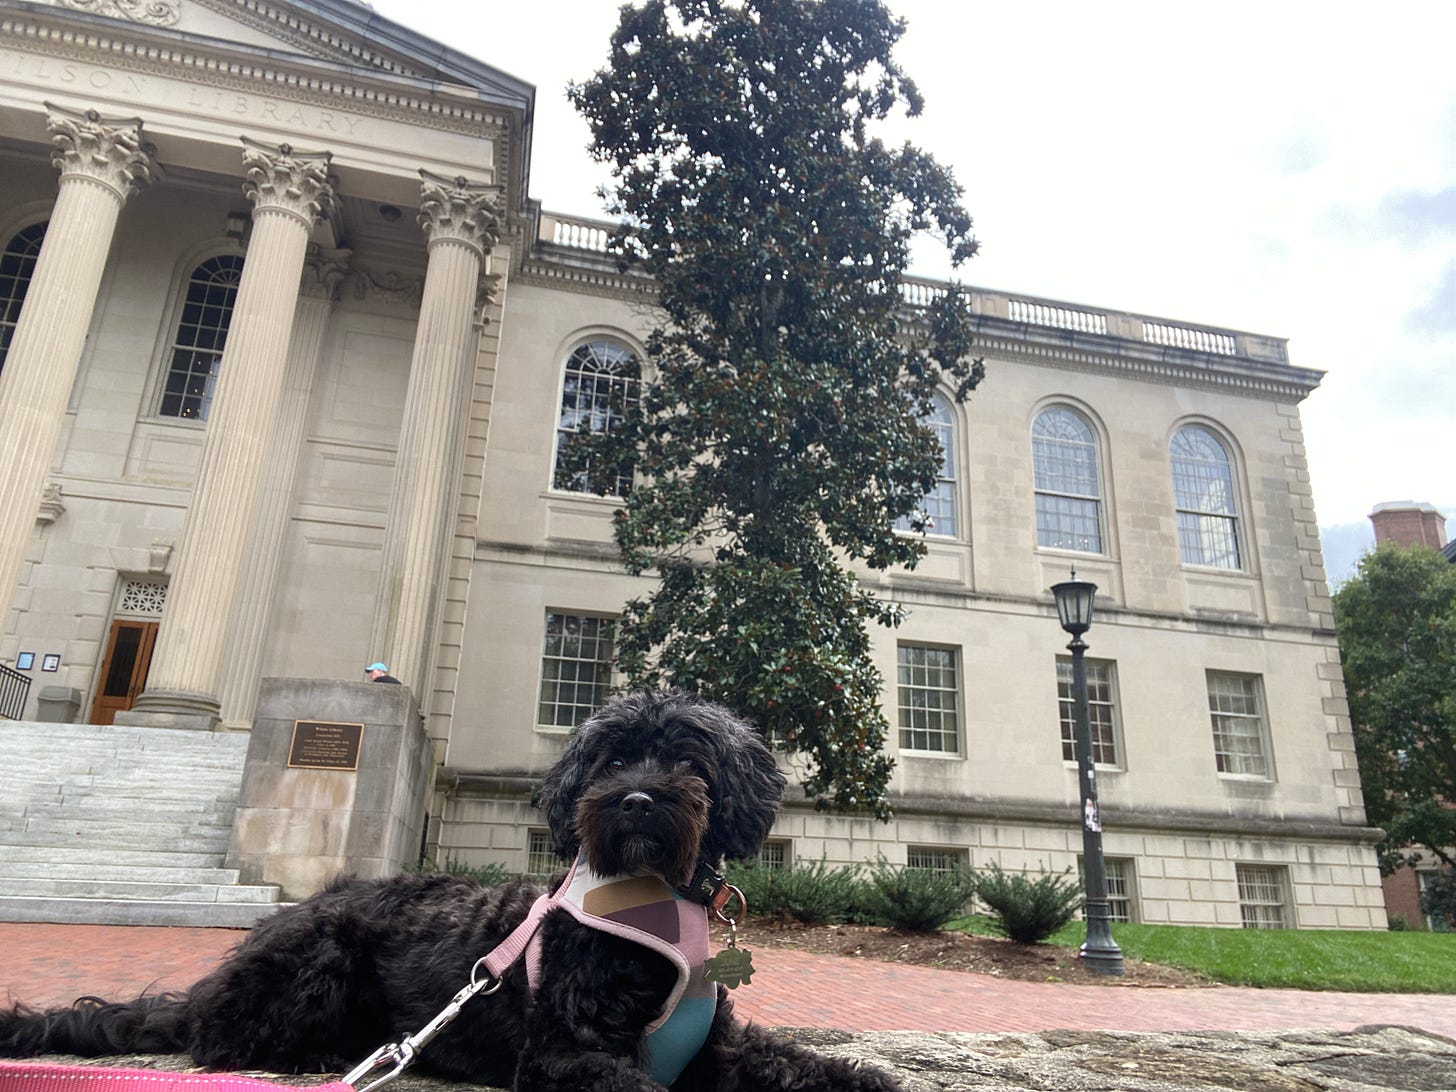 A small black dog with curly hair sitting outside of a big library with Greek style columns and a magnolia tree.